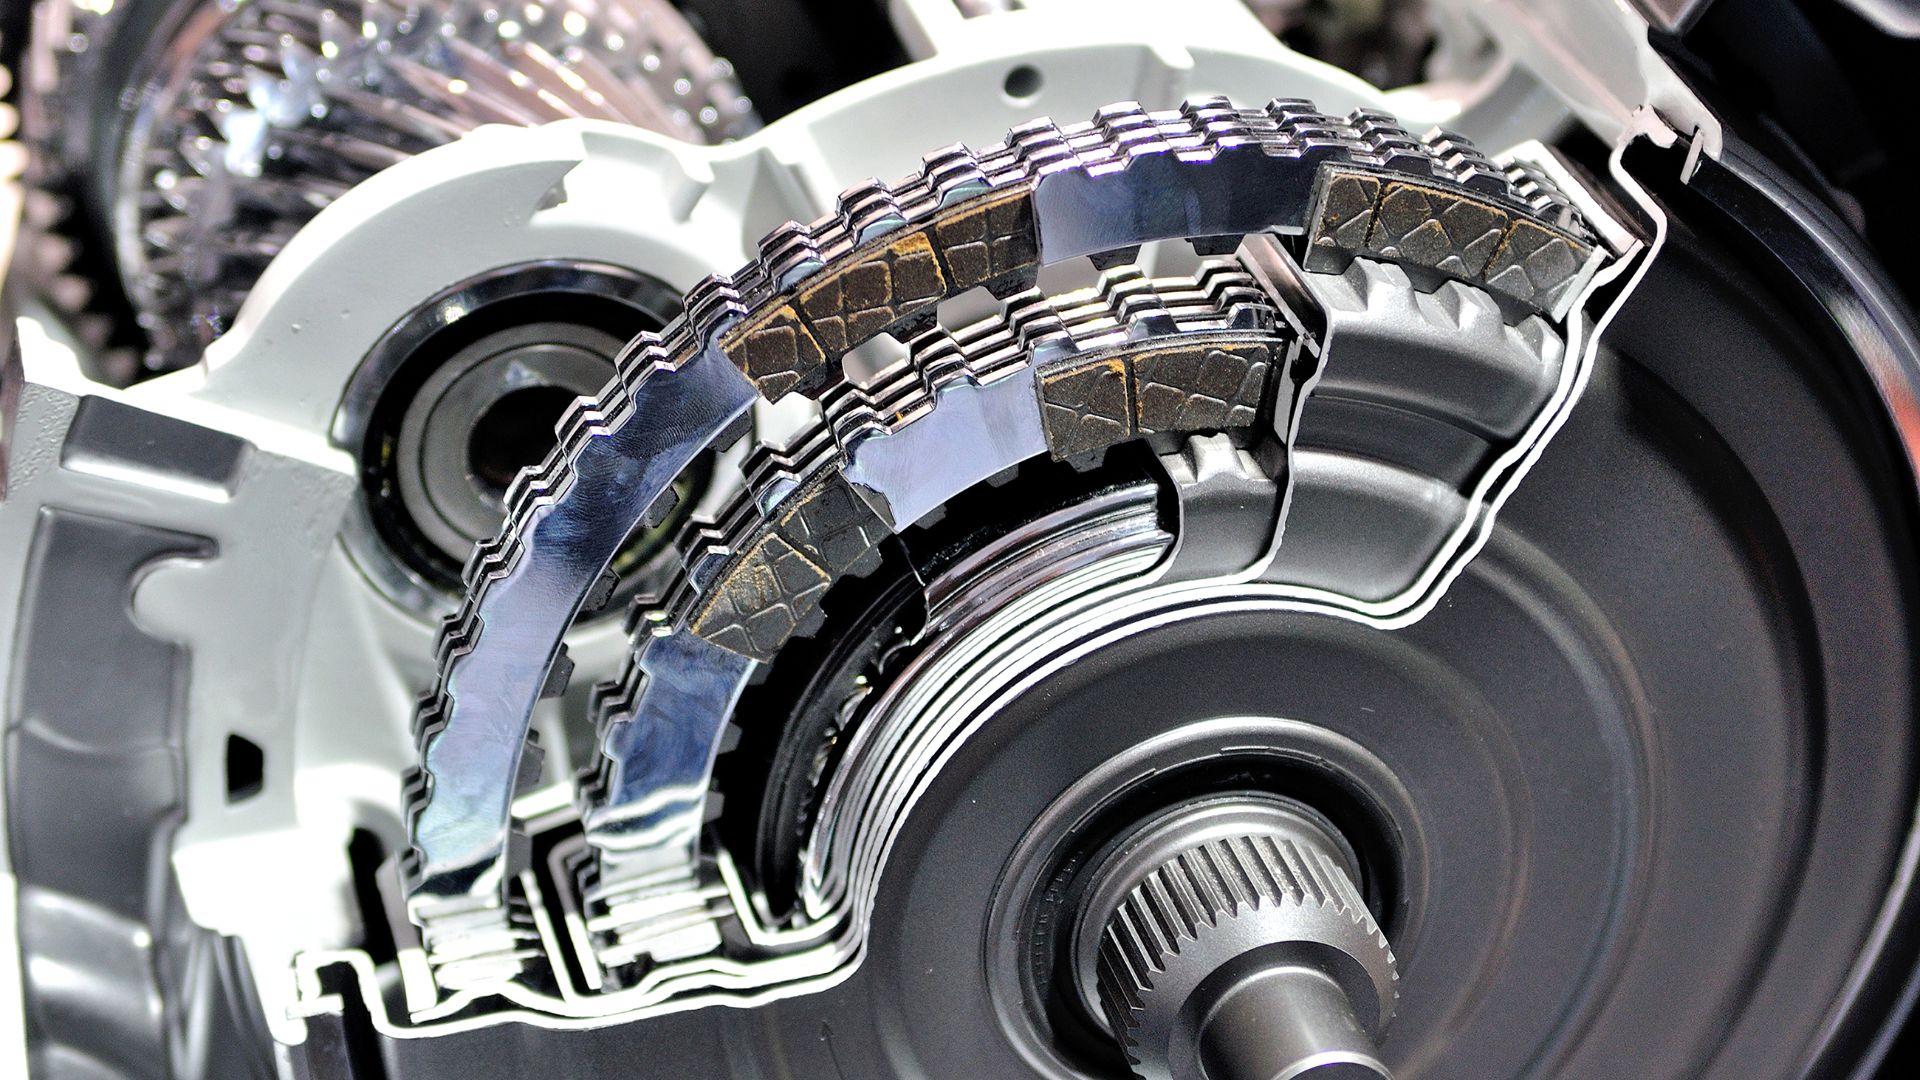 a close up of a motorcycle's gears and gears.